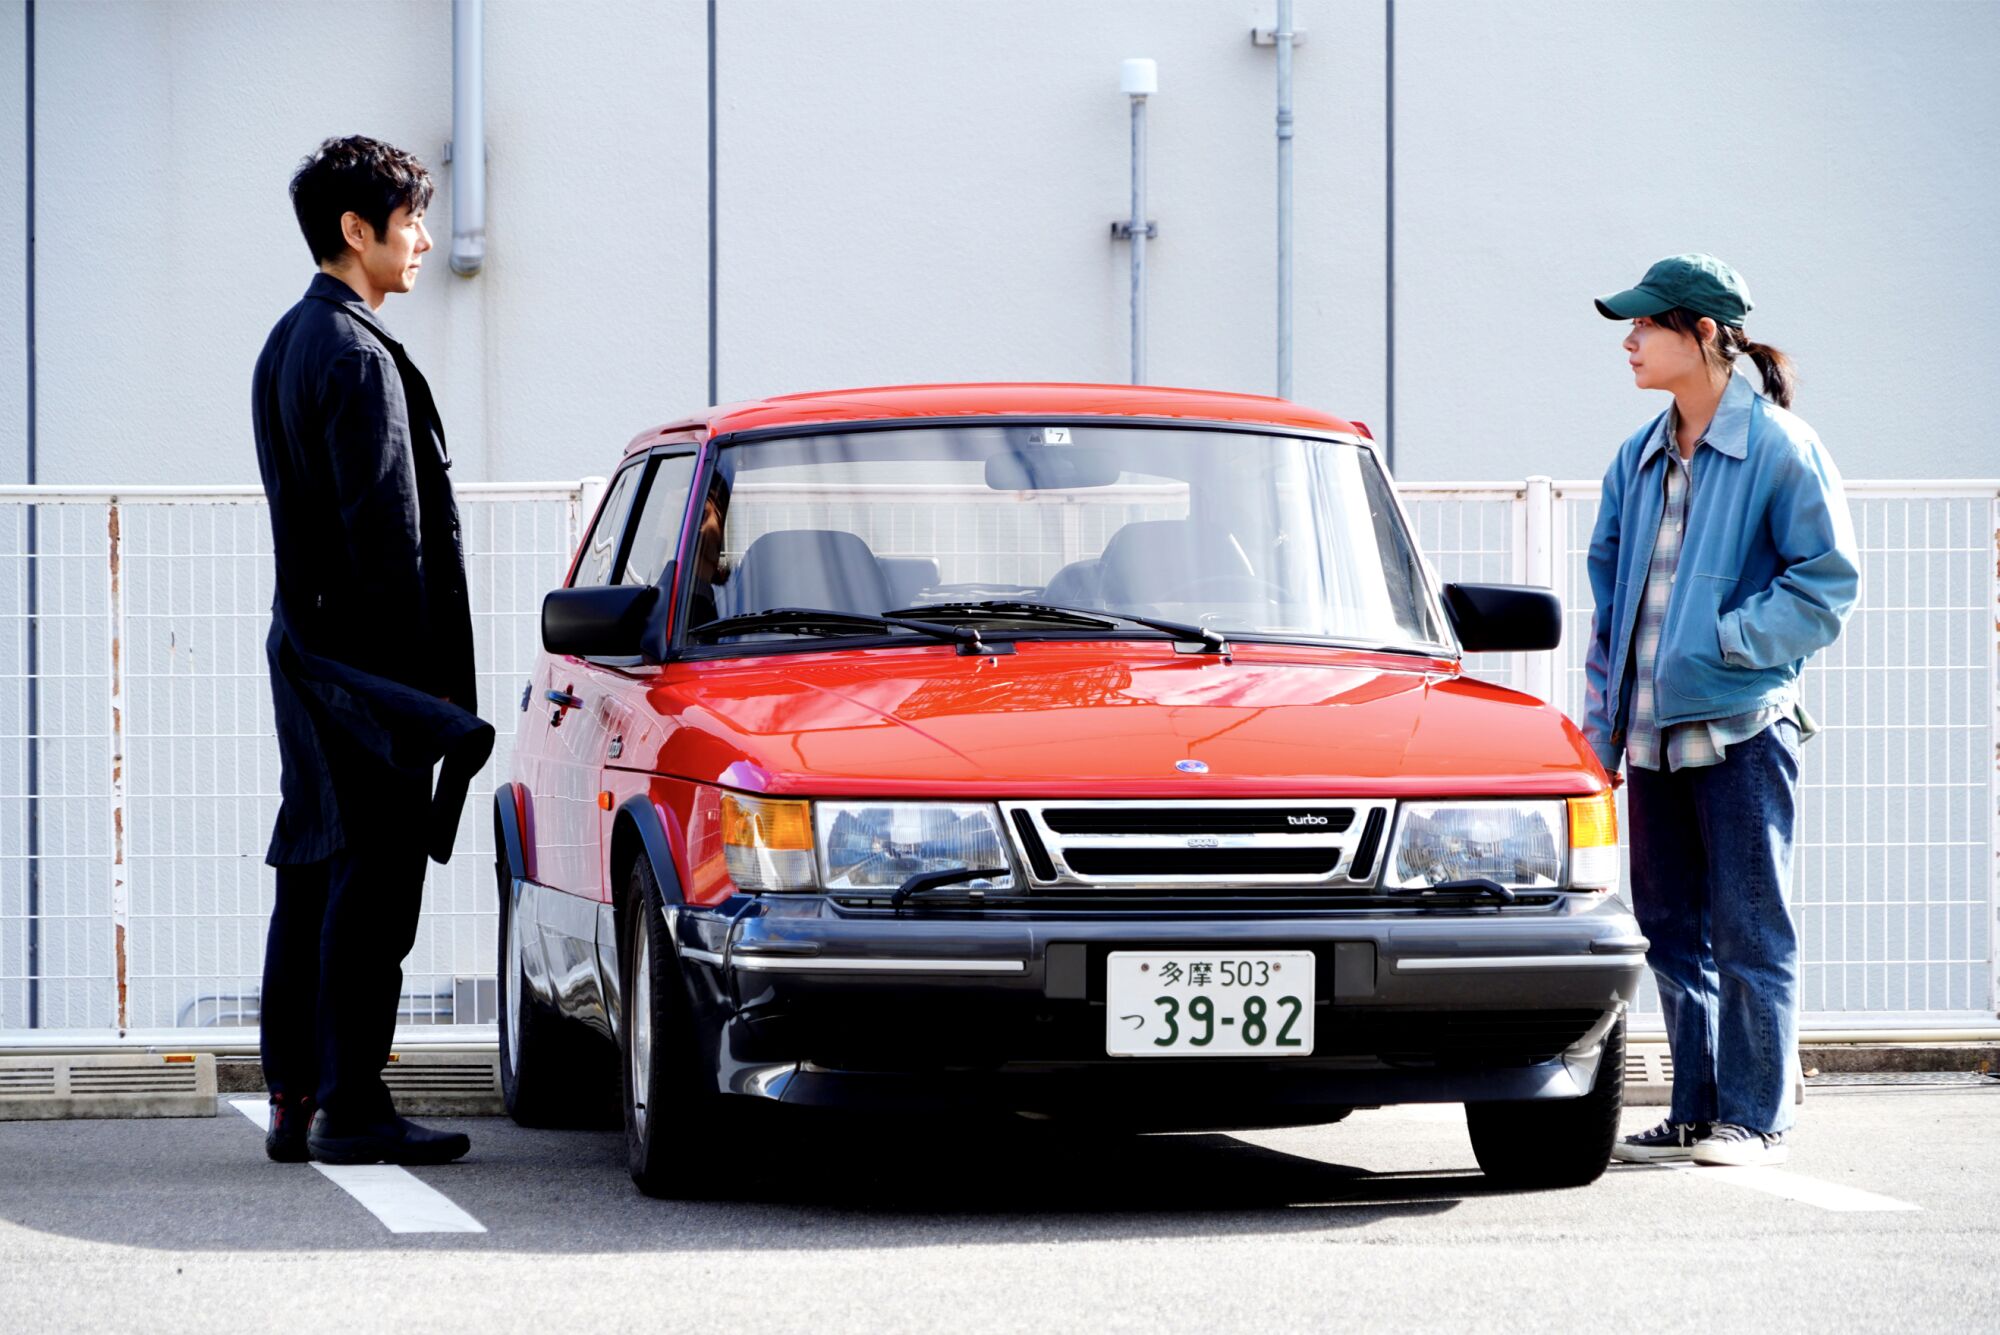 A man and woman stand outside a car in a scene from "Drive My Car."